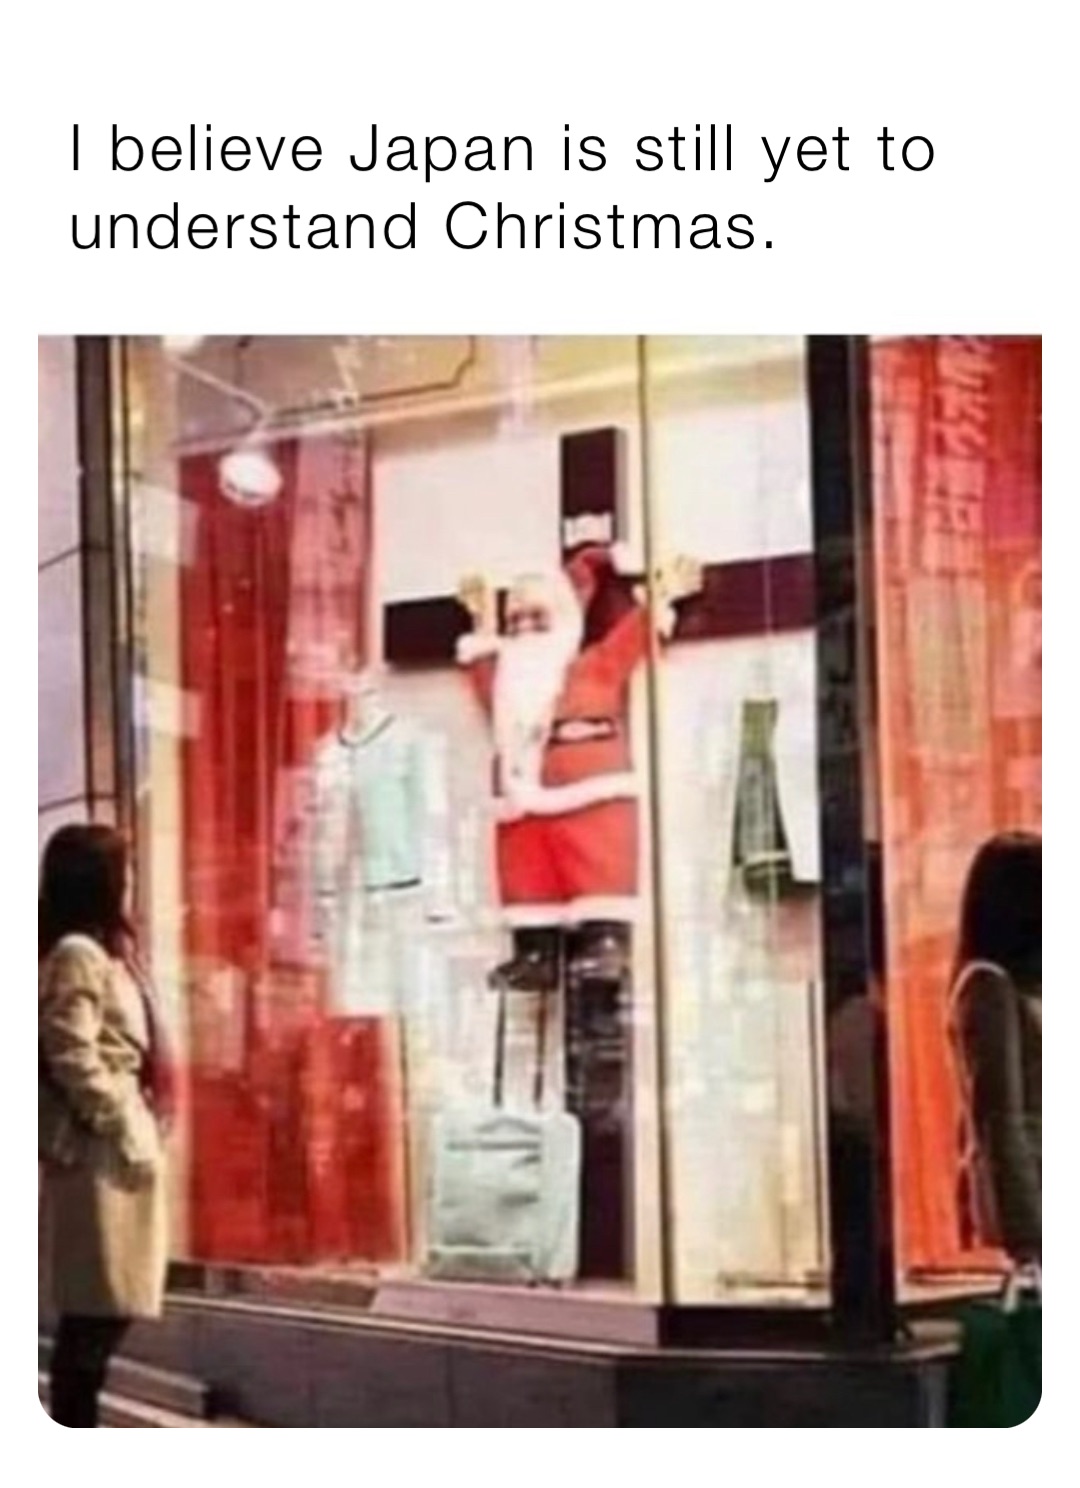 I believe Japan is still yet to understand Christmas.